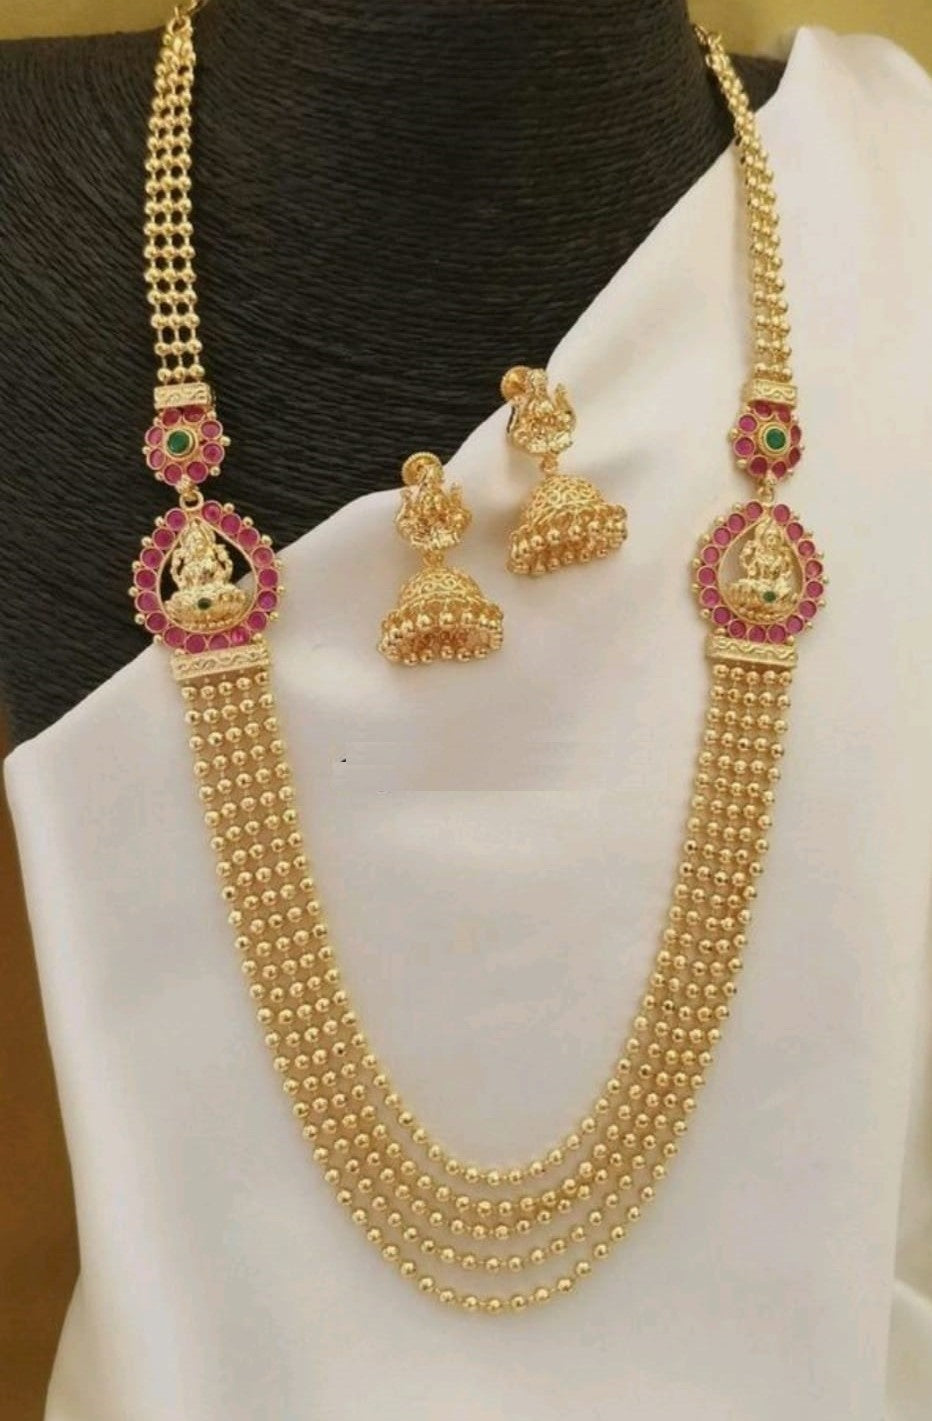 Multilayer Long Necklace Haar Aaram With Ruby Green Stones And Matching Jhumka Adorned by Lakshmi